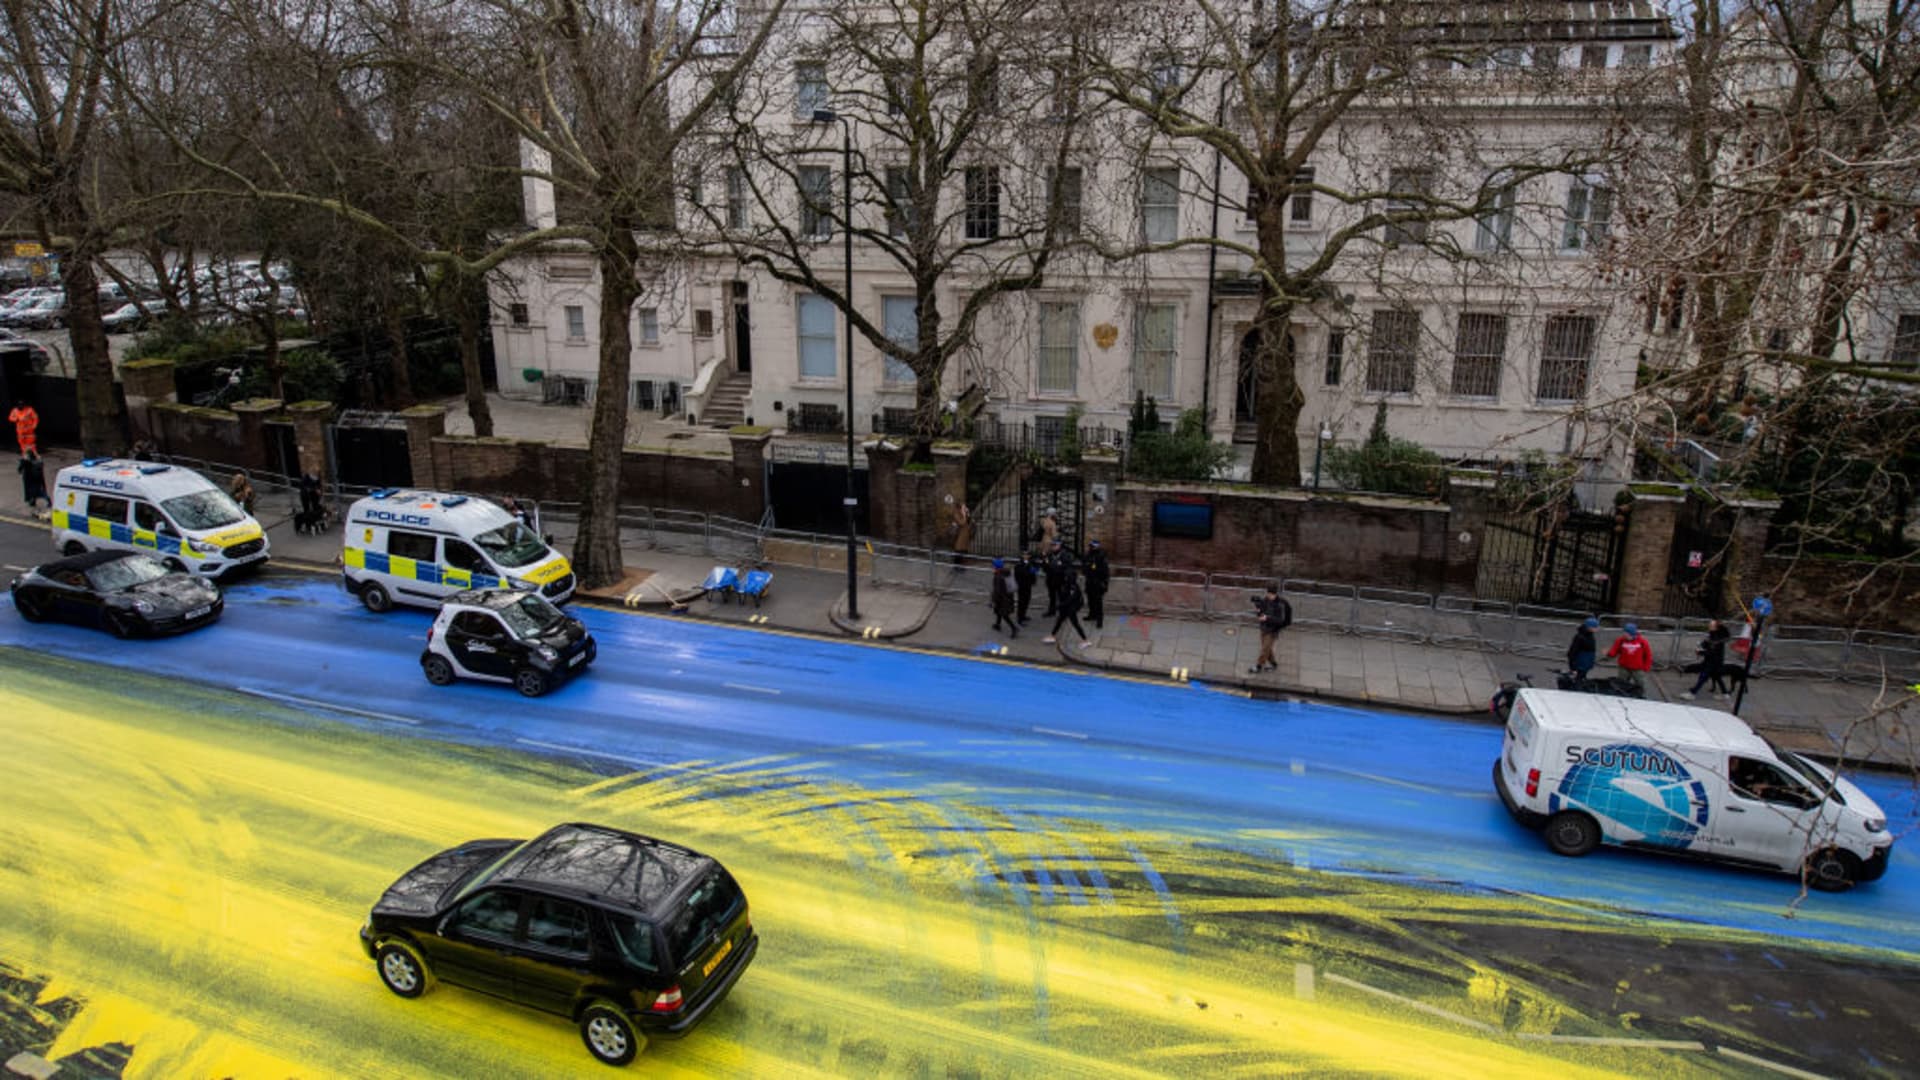 Activists from political campaign group Led By Donkeys poured paint onto the road to create a giant Ukrainian flag outside the Russian Embassy on February 23, 2023 in London, England. The group created the flag using washable paint poured onto the road and then driven through by passing vehicles.